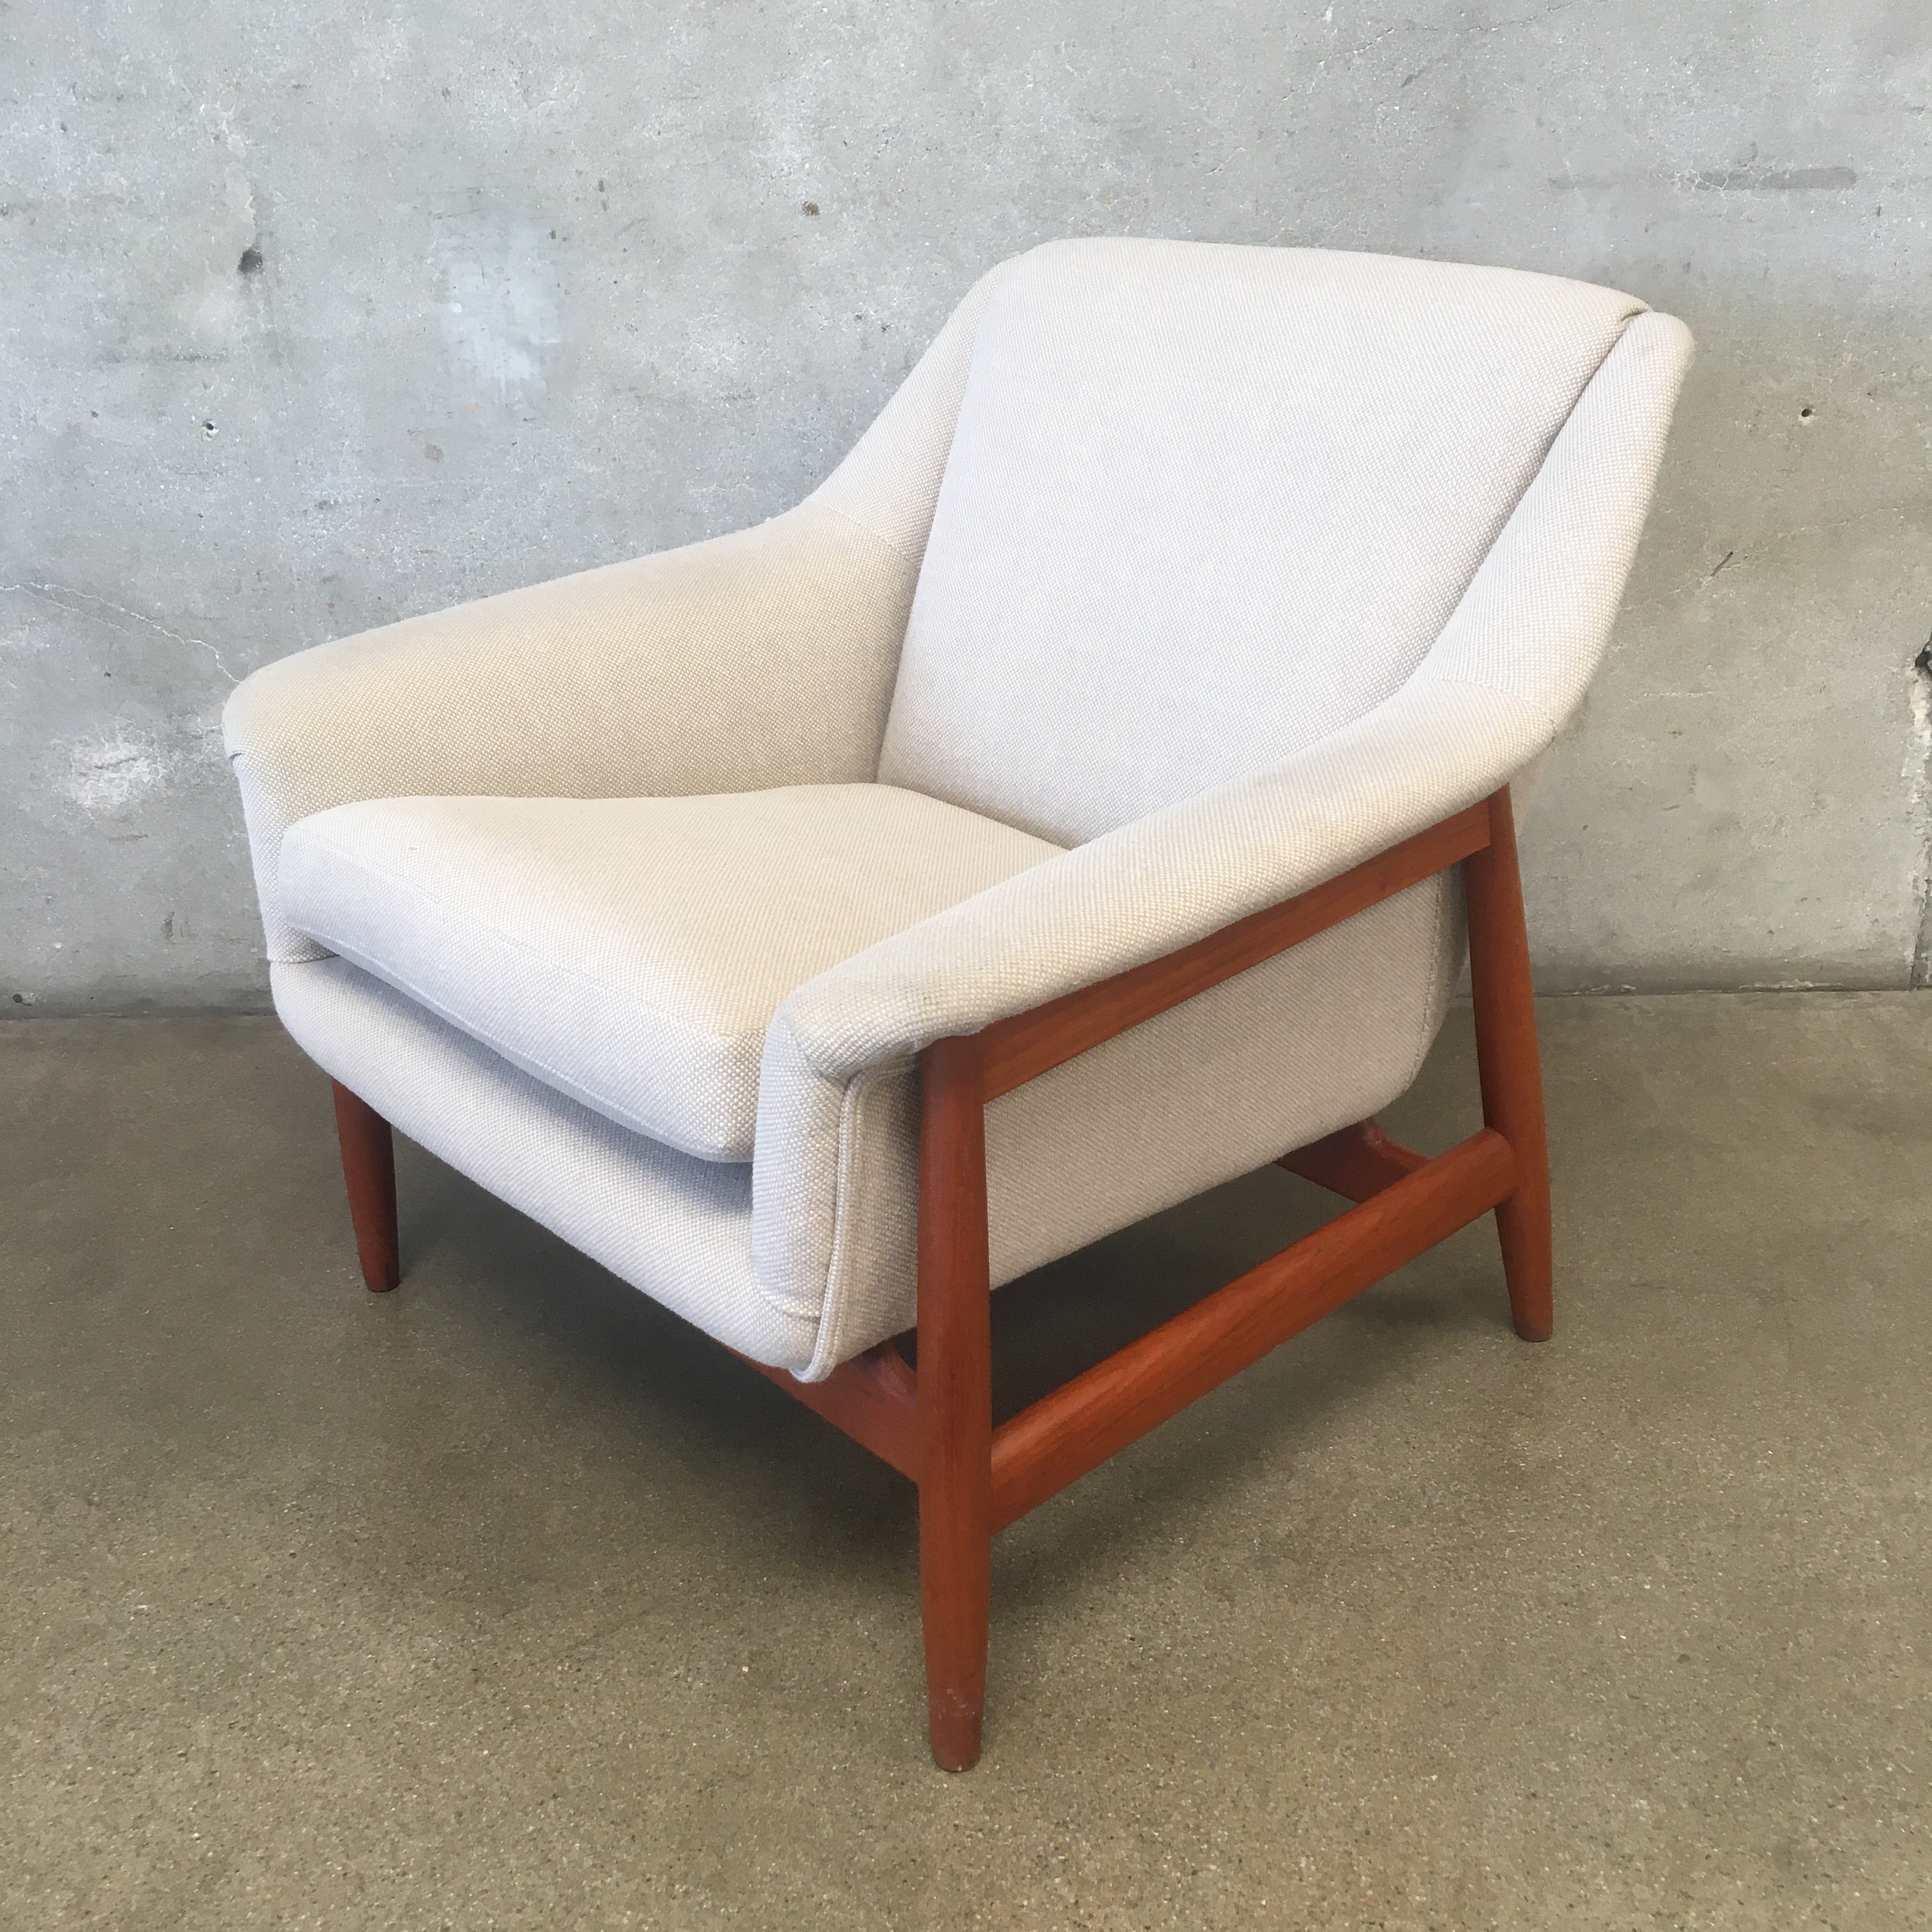 Mid Modern 1960s Lounge Chair Folkeohlesson for Dux